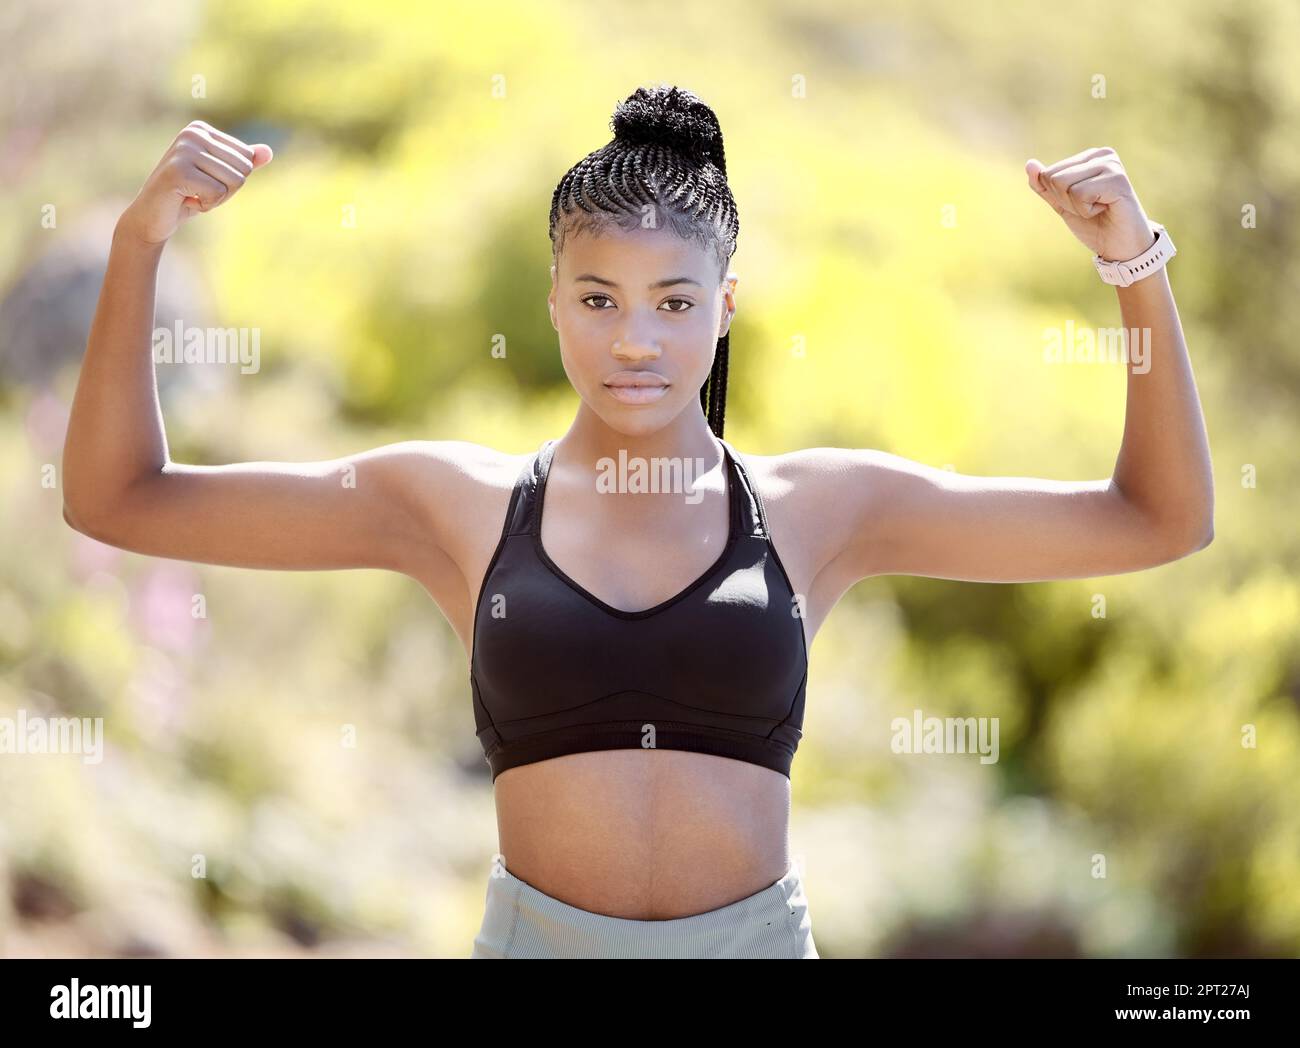 Fitness, strong arm muscles an black woman after a sports workout